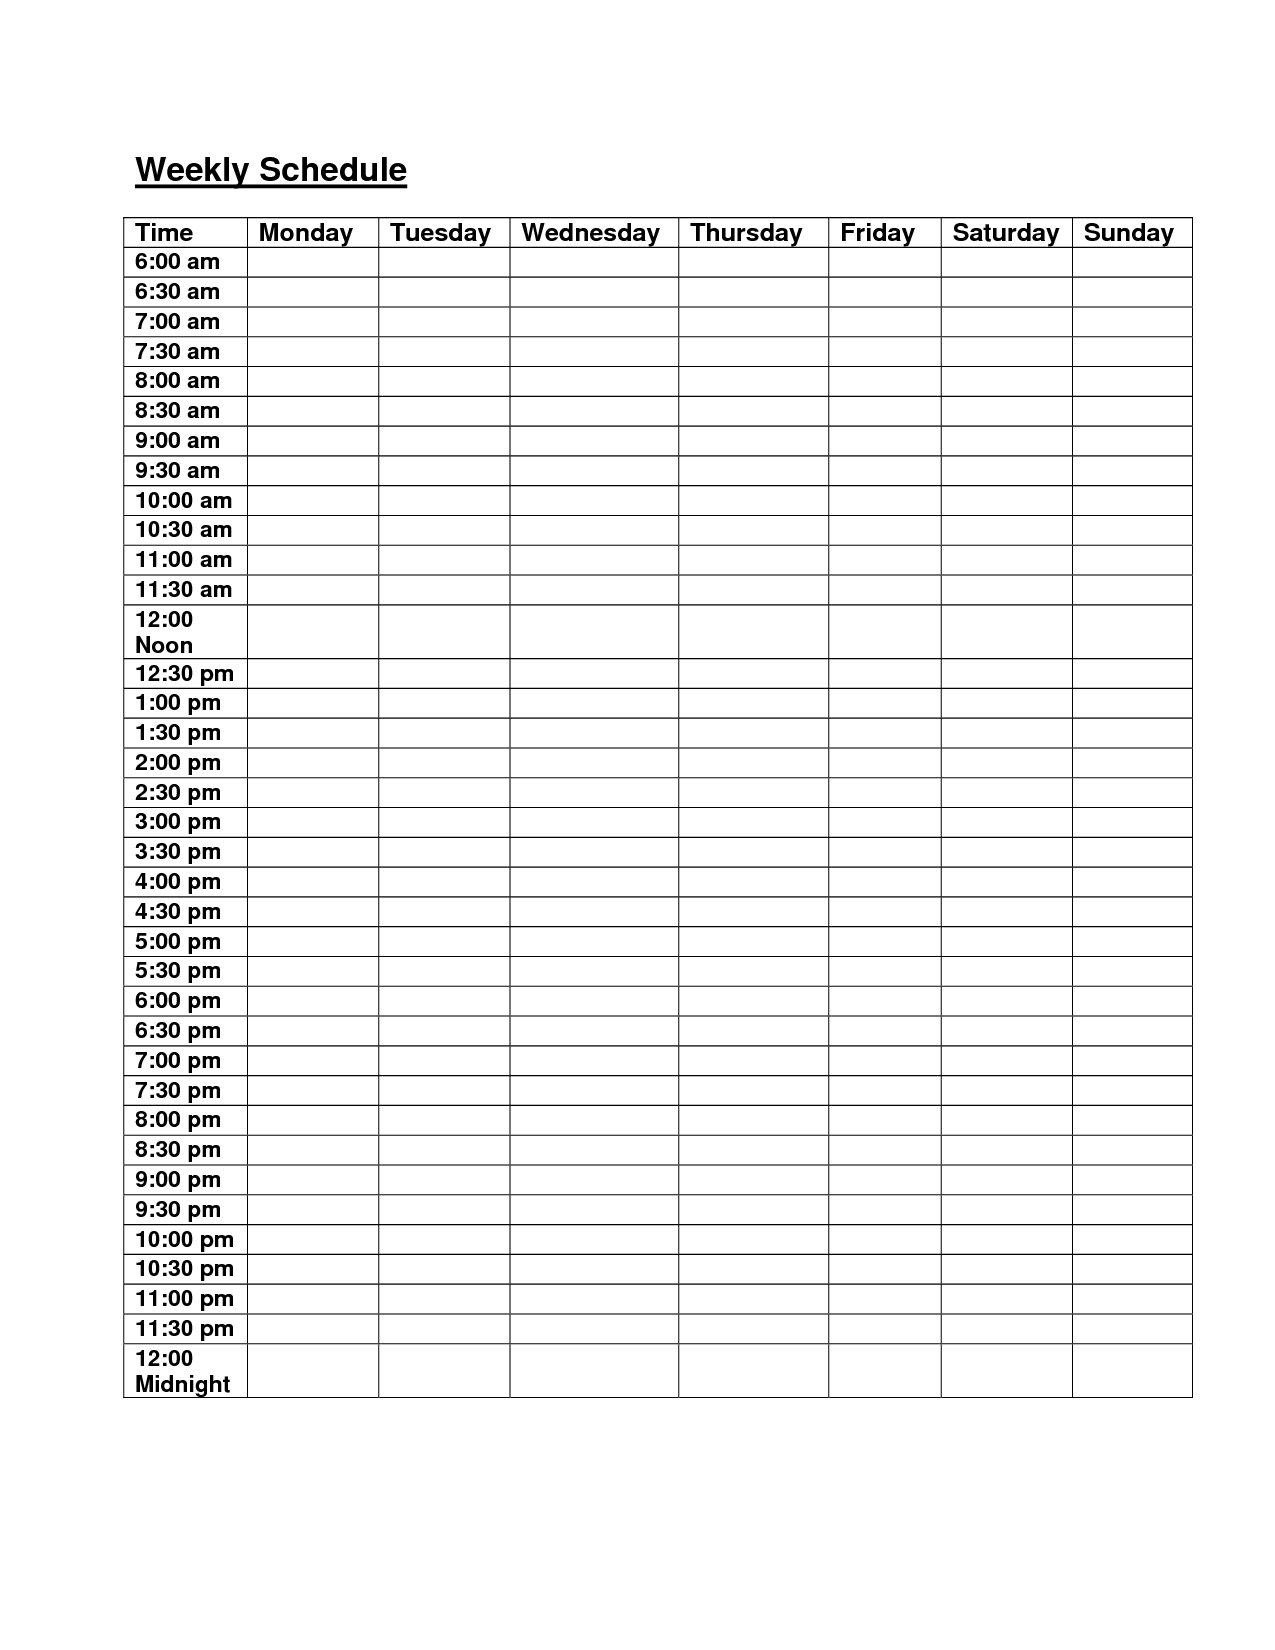 6Am Midnight Hourly Weekly Schedule Planner | Printables for Printable Hourly Weekly Calendar